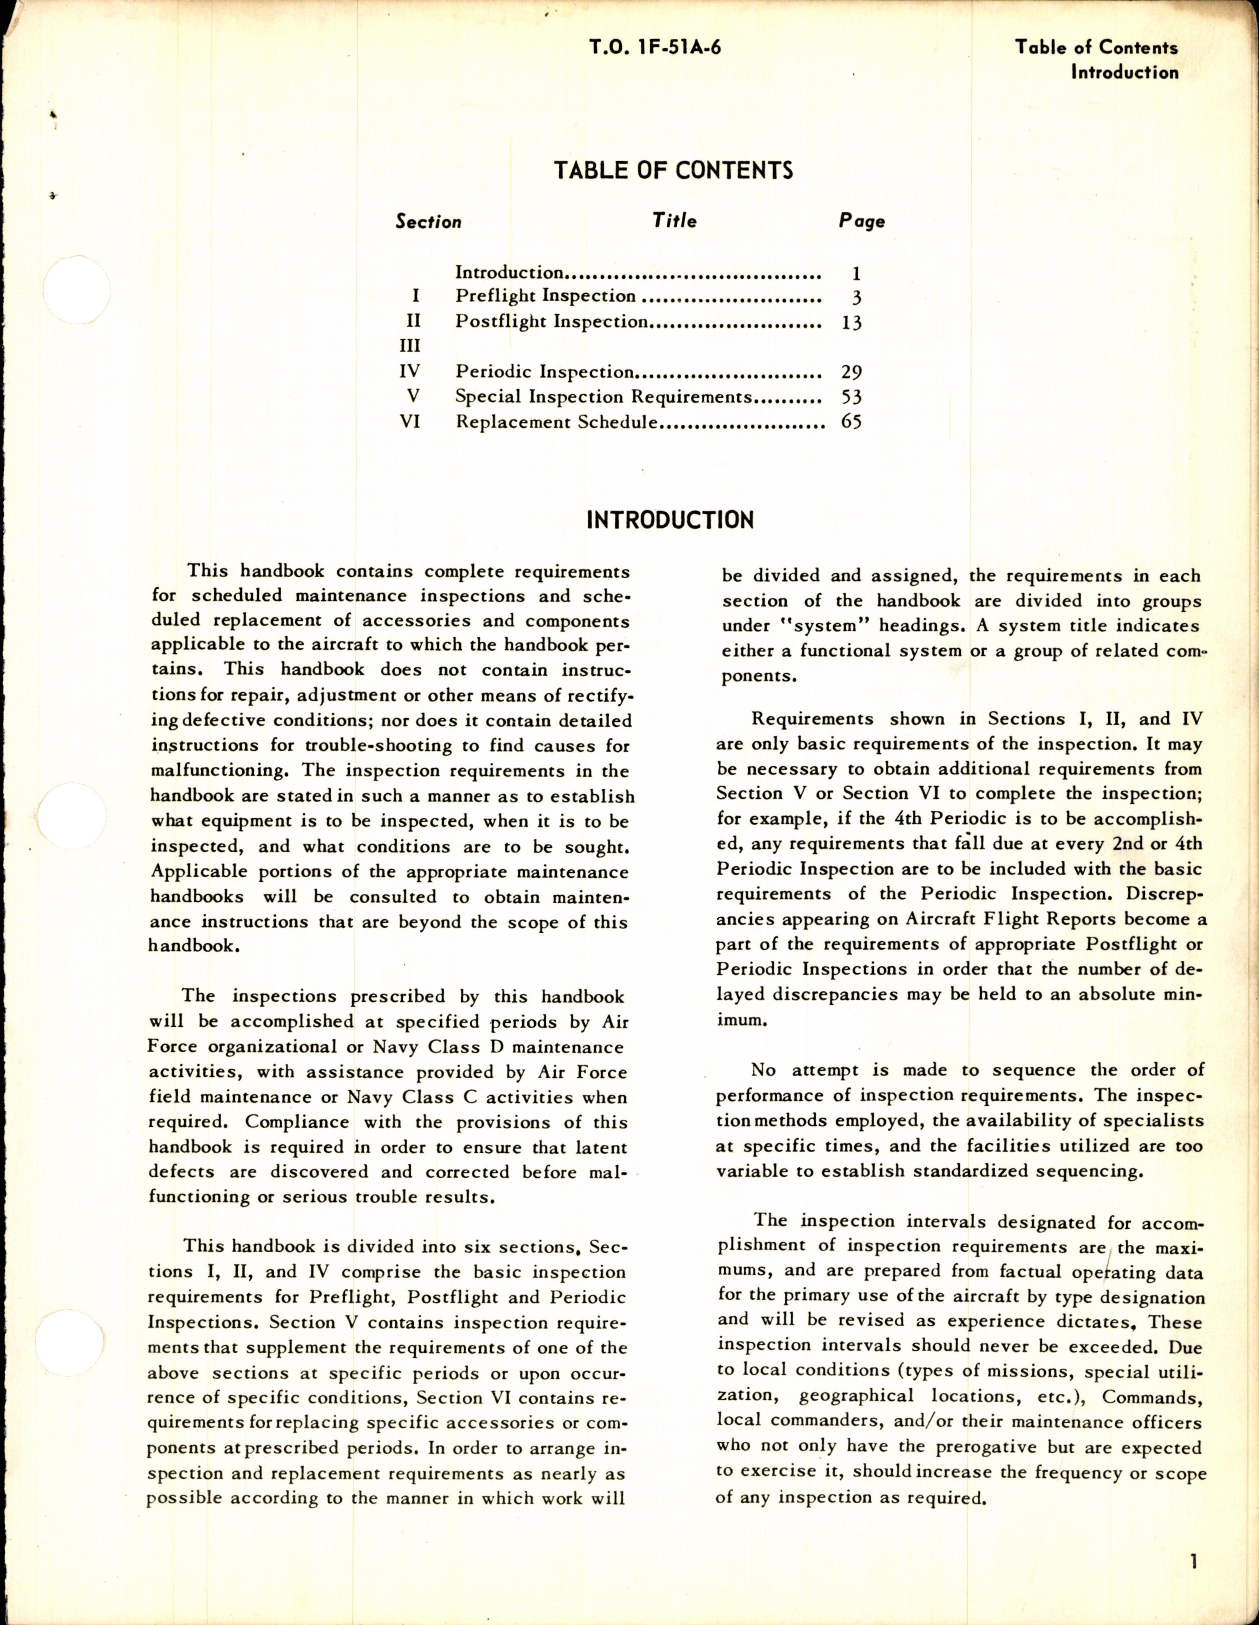 Sample page 3 from AirCorps Library document: T.O. No. 1F-51A-6, Inspection Requirements for USAF F-51 Series Aircraft, 1-July-1954